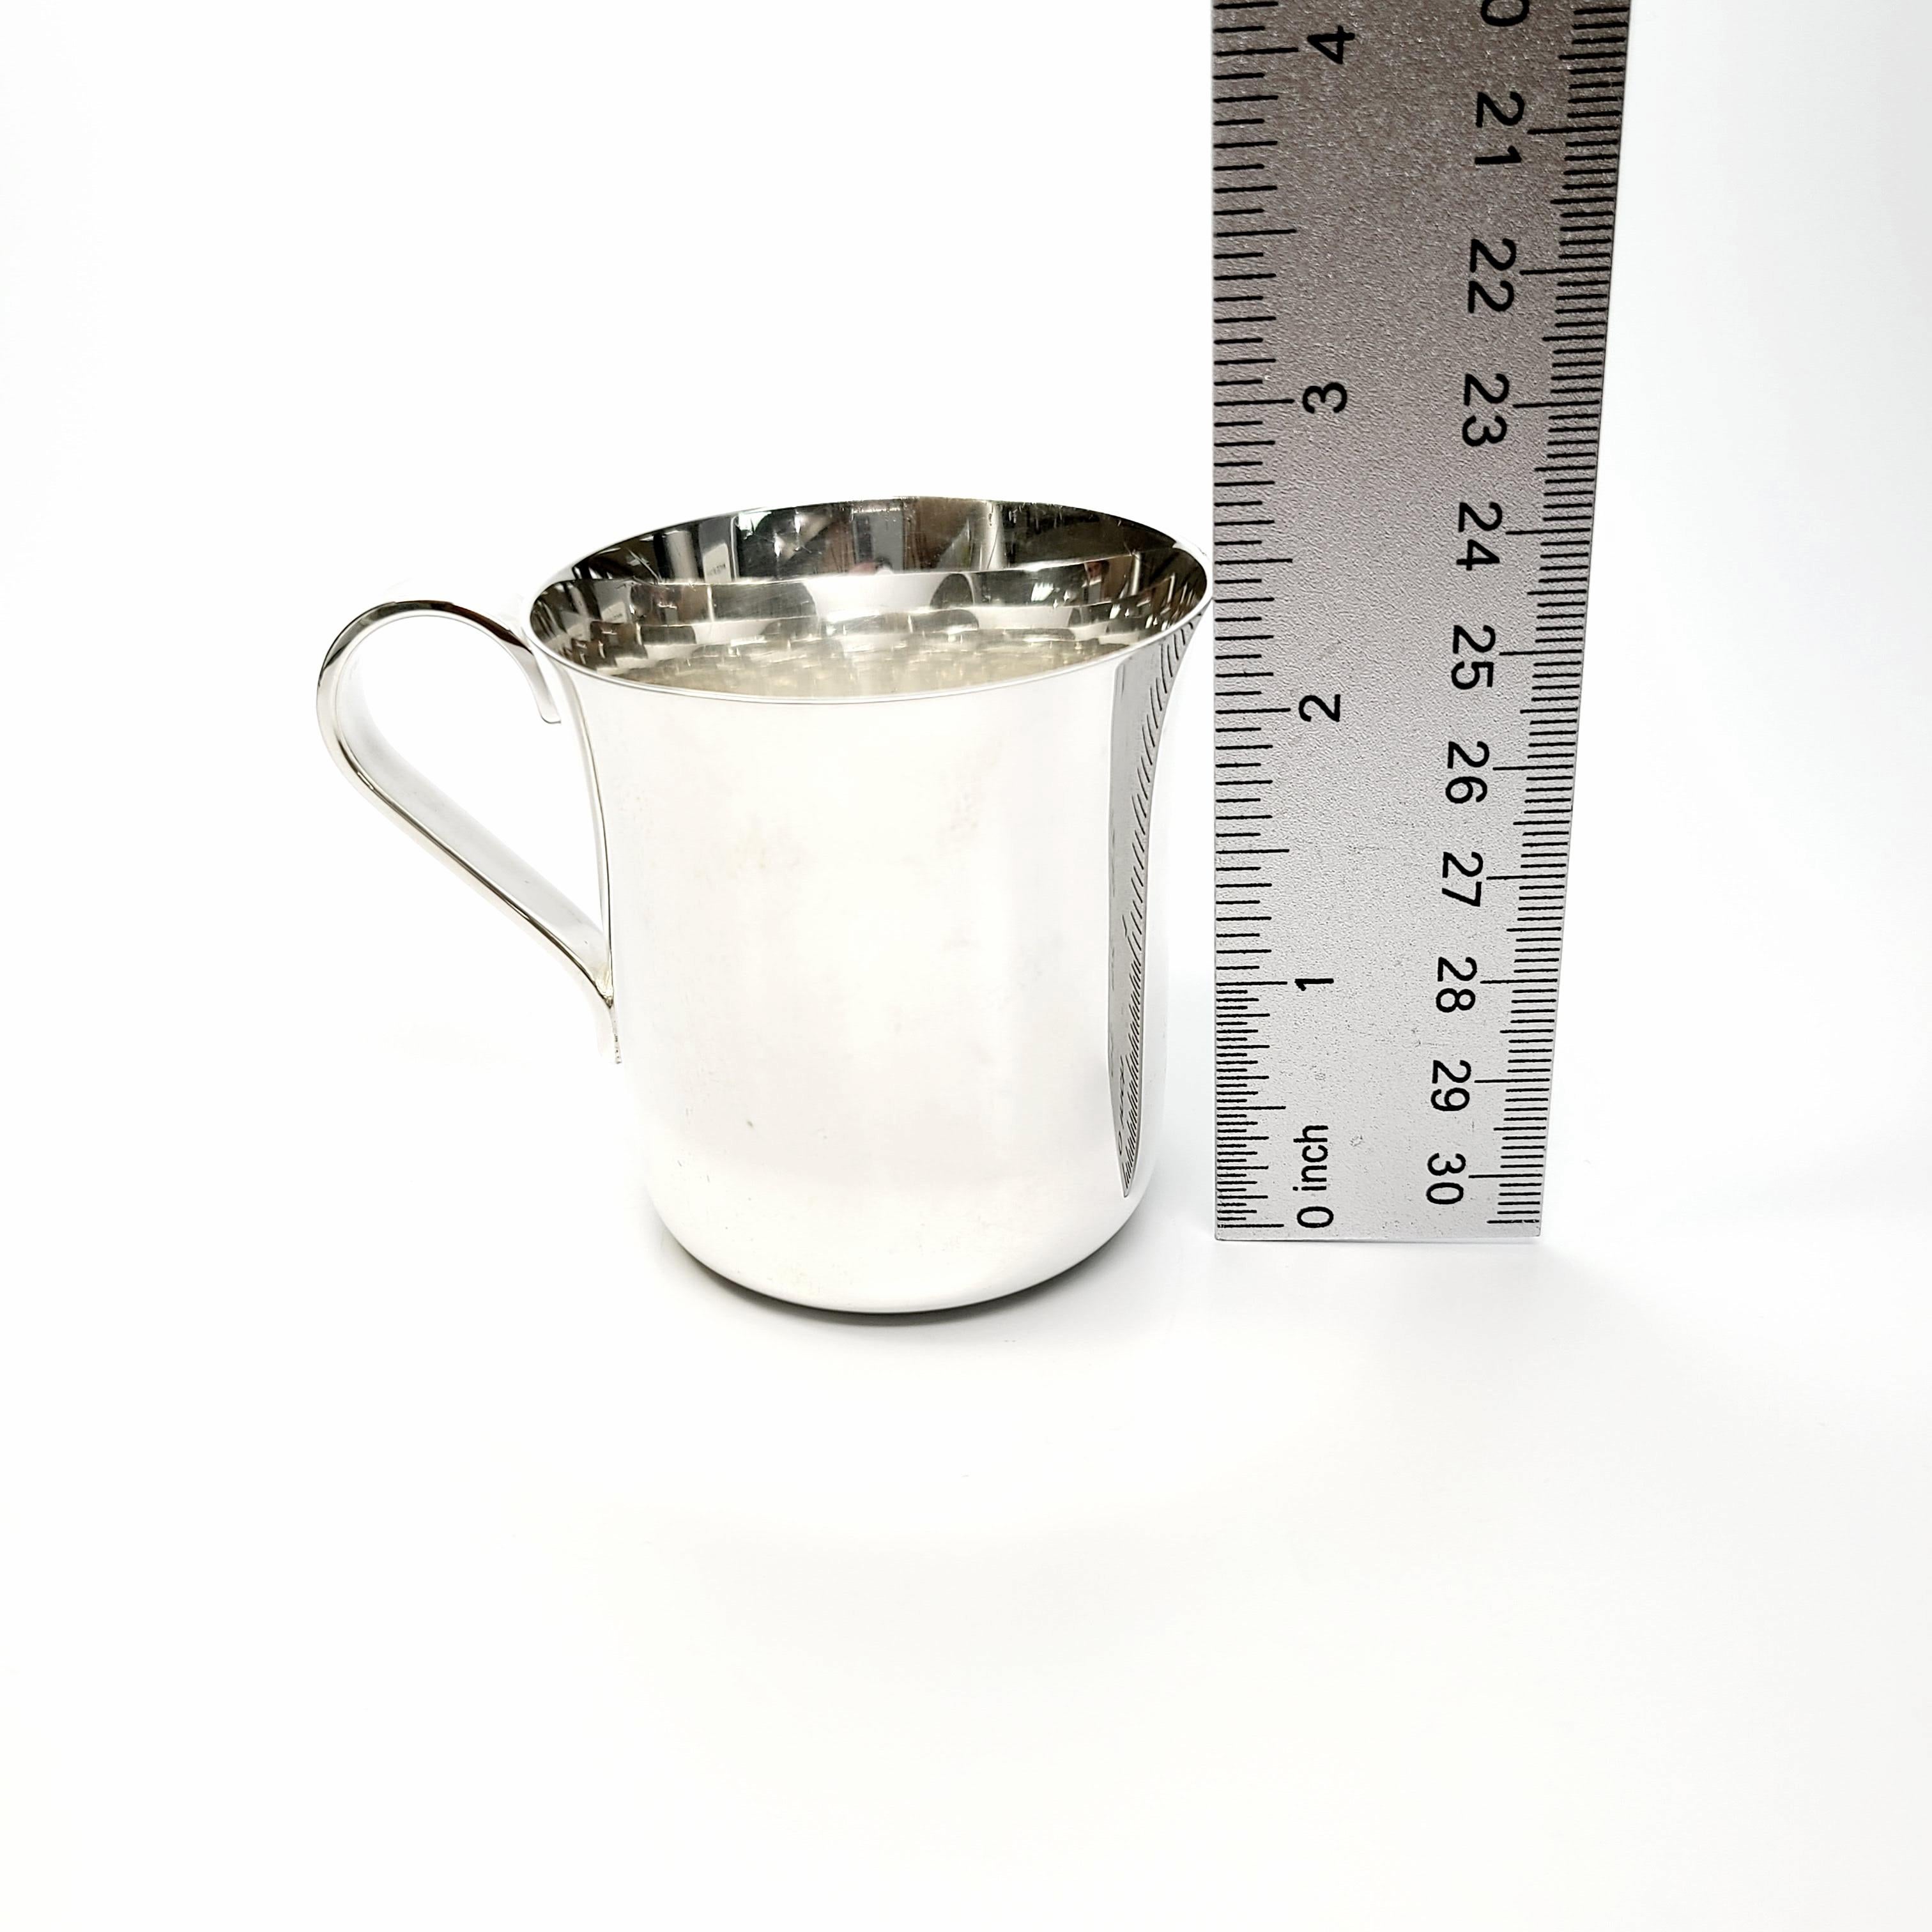 Tiffany & Co. Sterling Silver Baby Cup Pattern #23245 1